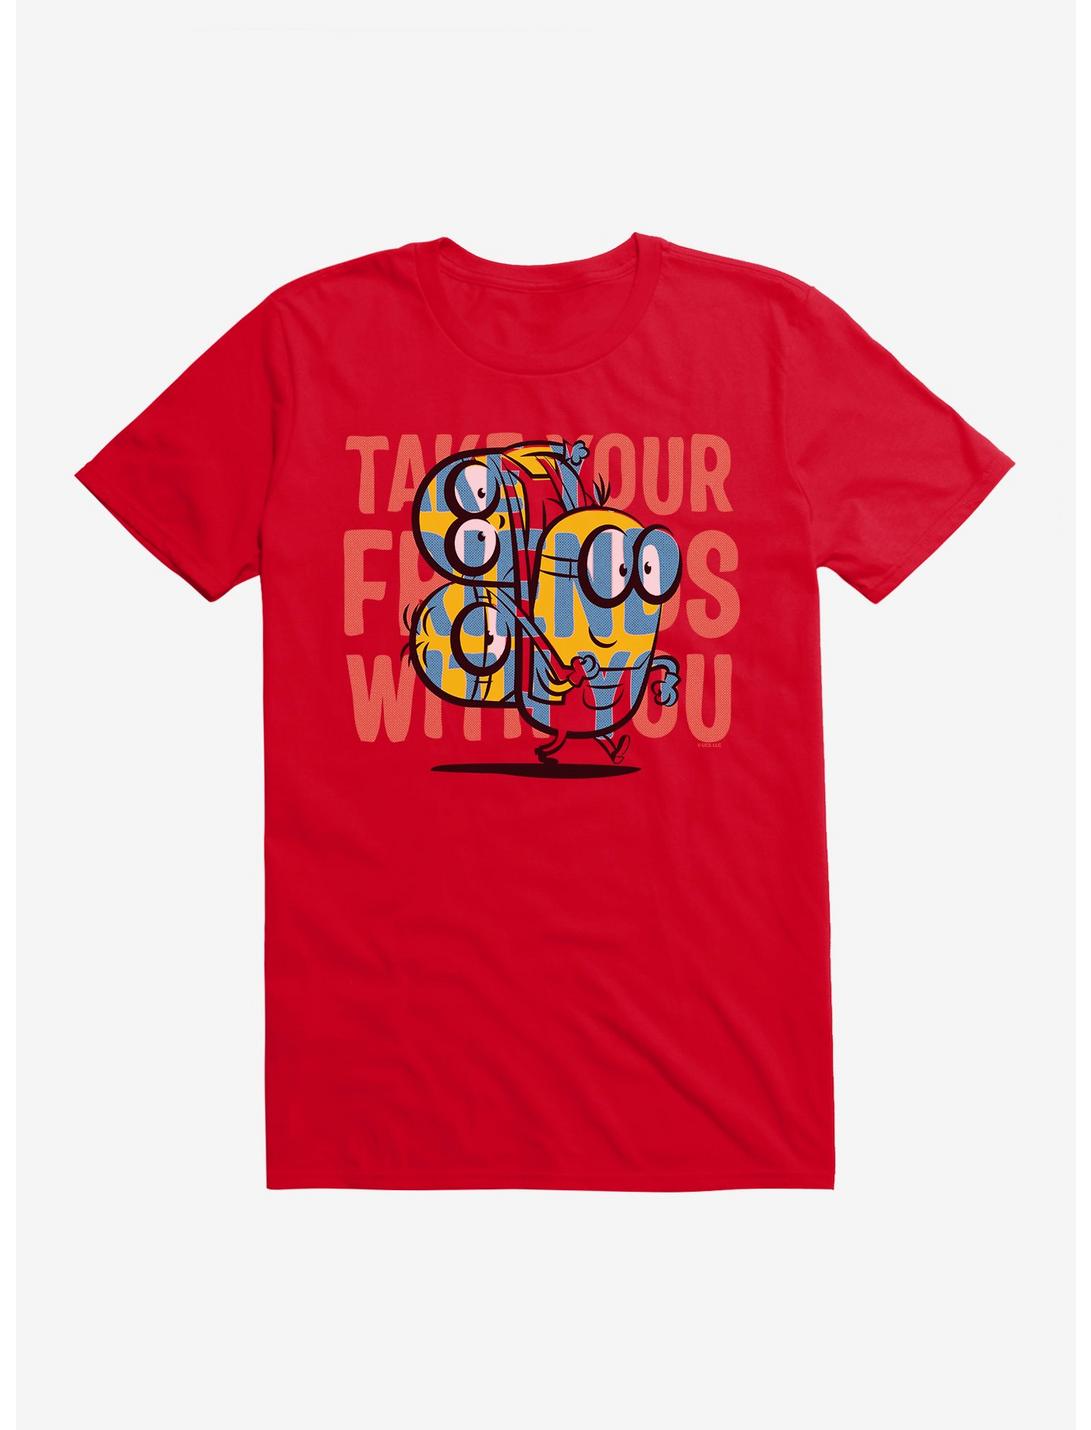 Minions Take Your Friends T-Shirt, RED, hi-res